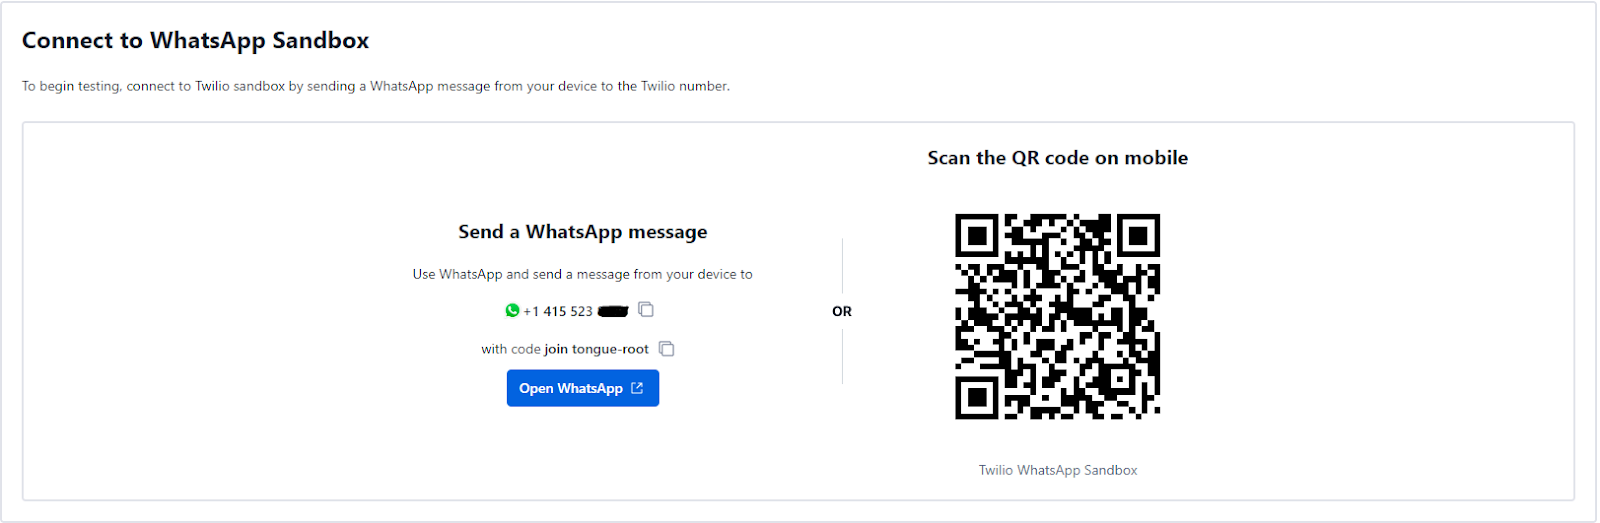 WhatsApp connection code on Twilio"s Console